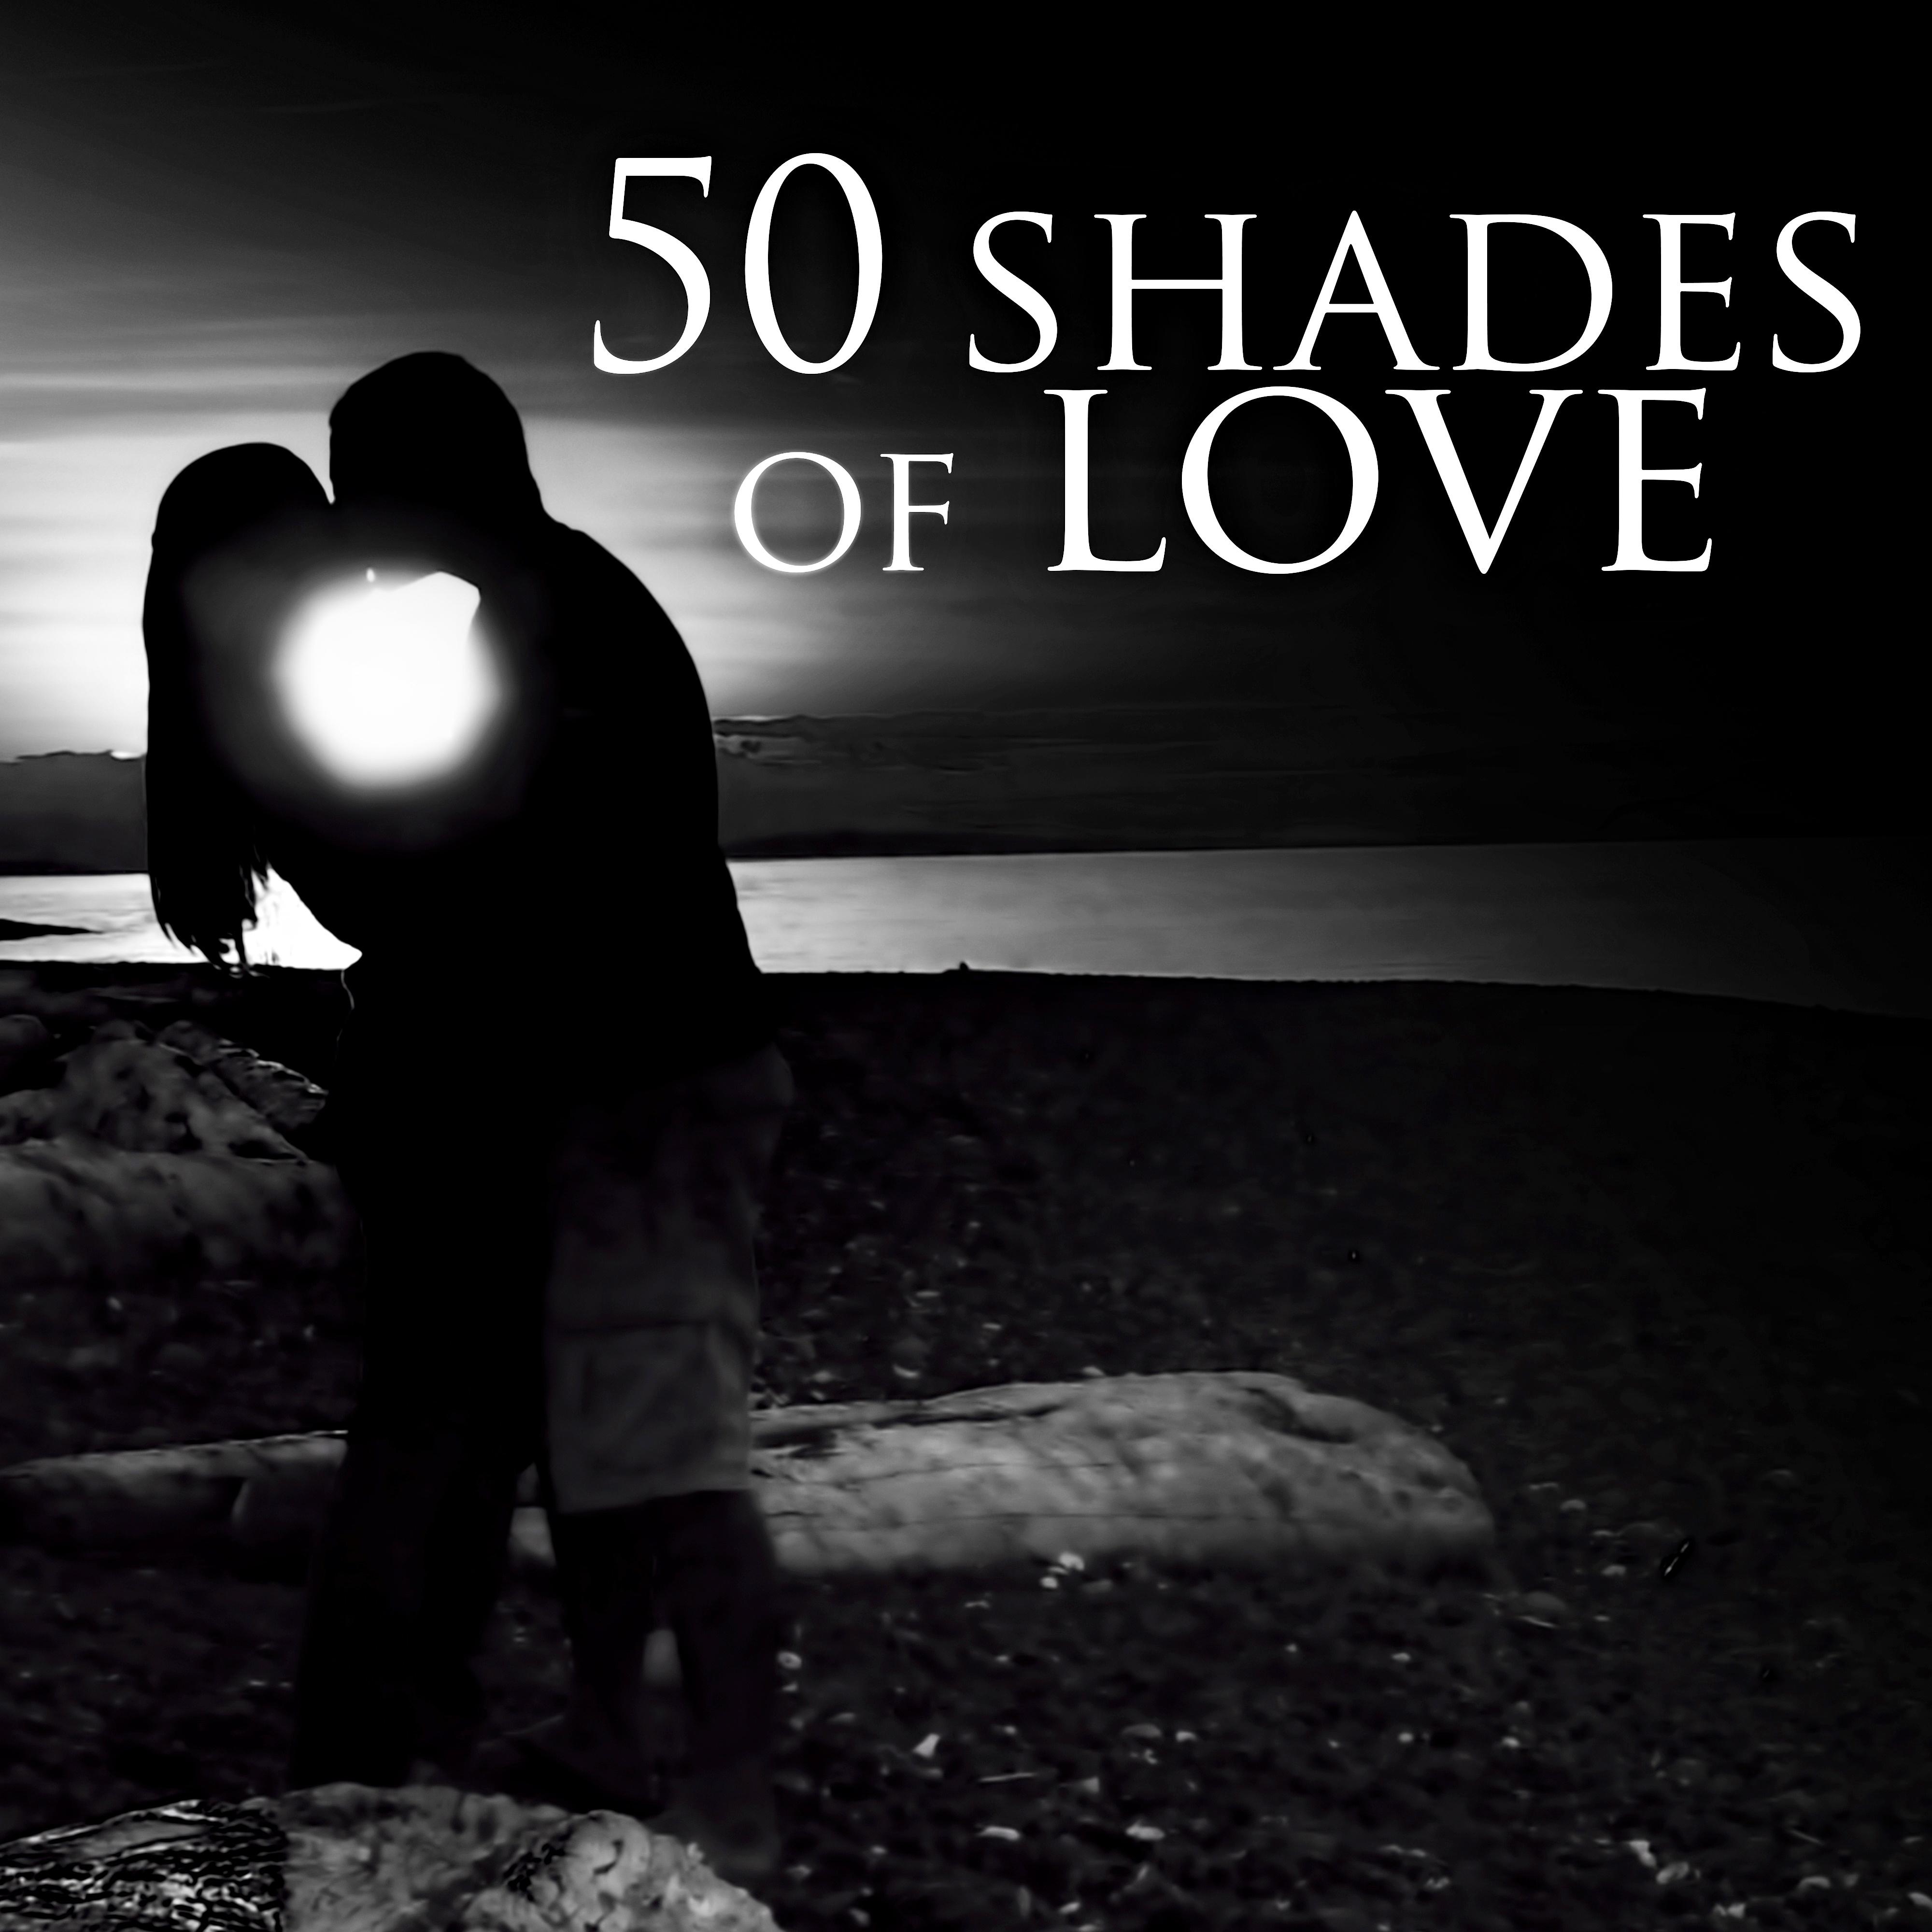 50 Shades of Love  Sensual Tantric Music Love Songs, Smooth Jazz  Piano Bar, Romantic Dinner Background Music, Erotic Massage Before Making Love, New Age Music for Relaxation, Shades of Grey,  Soundtrack